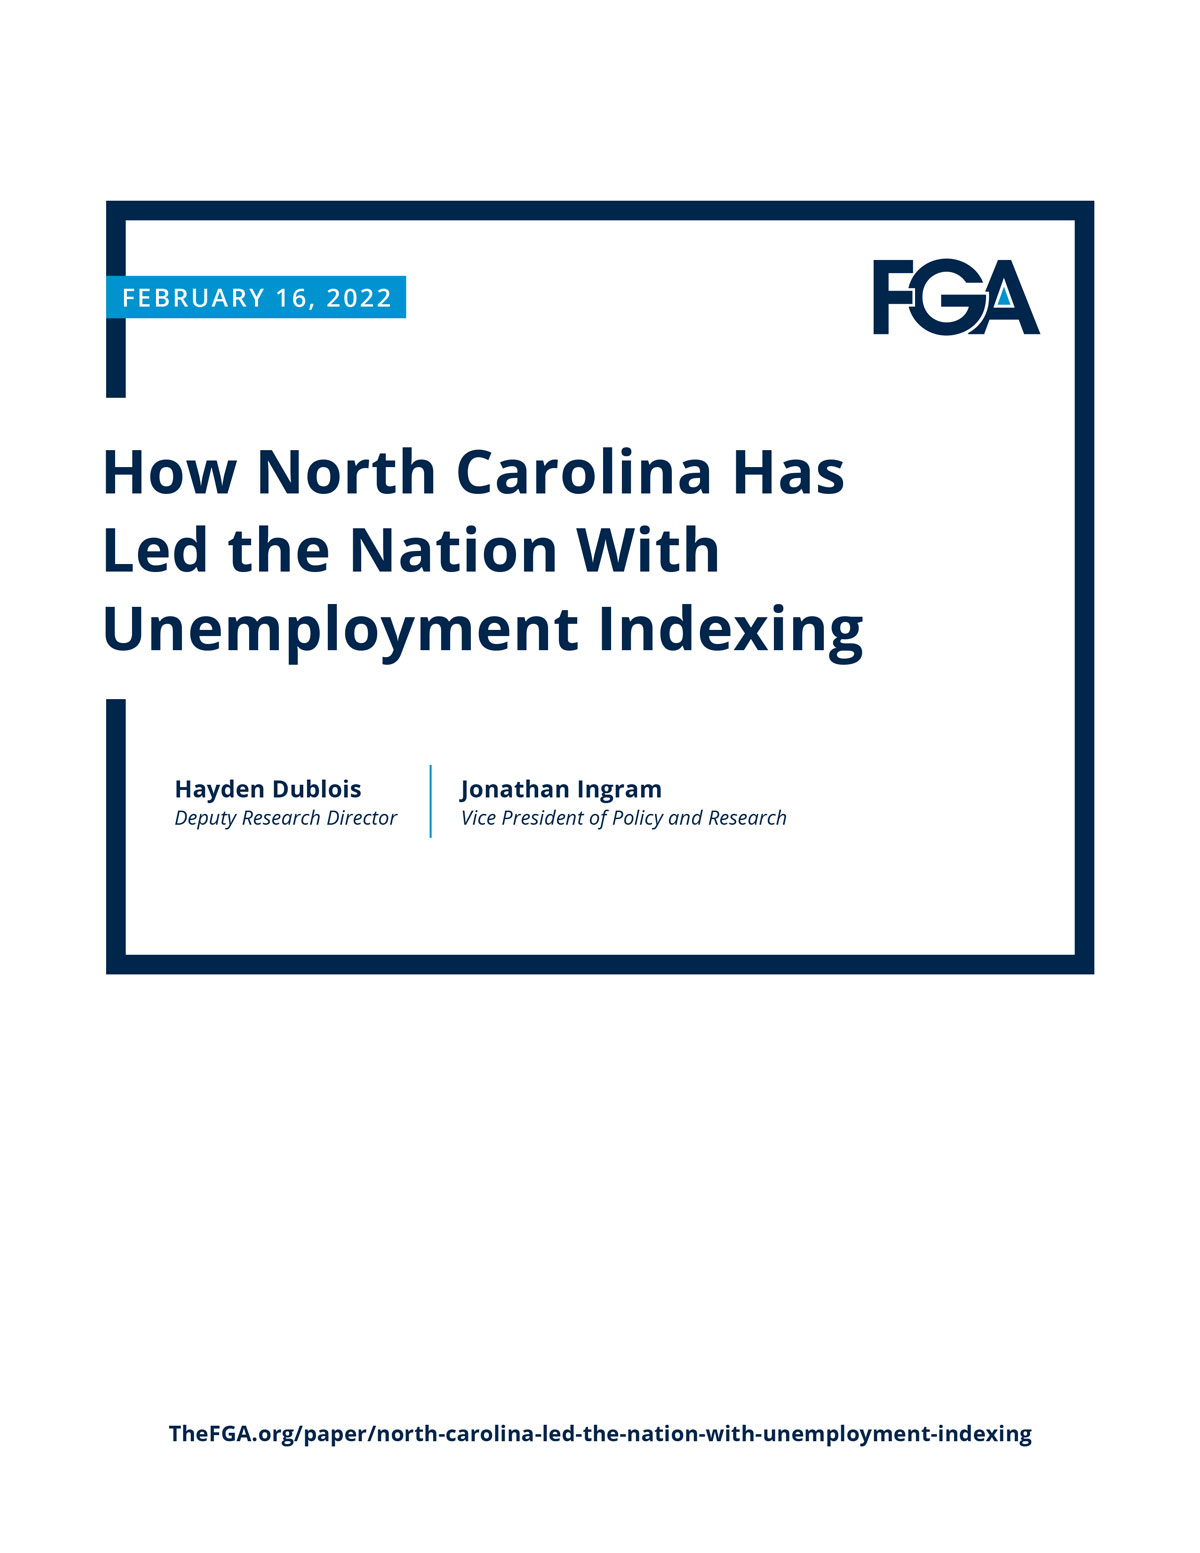 How North Carolina Has Led the Nation With Unemployment Indexing